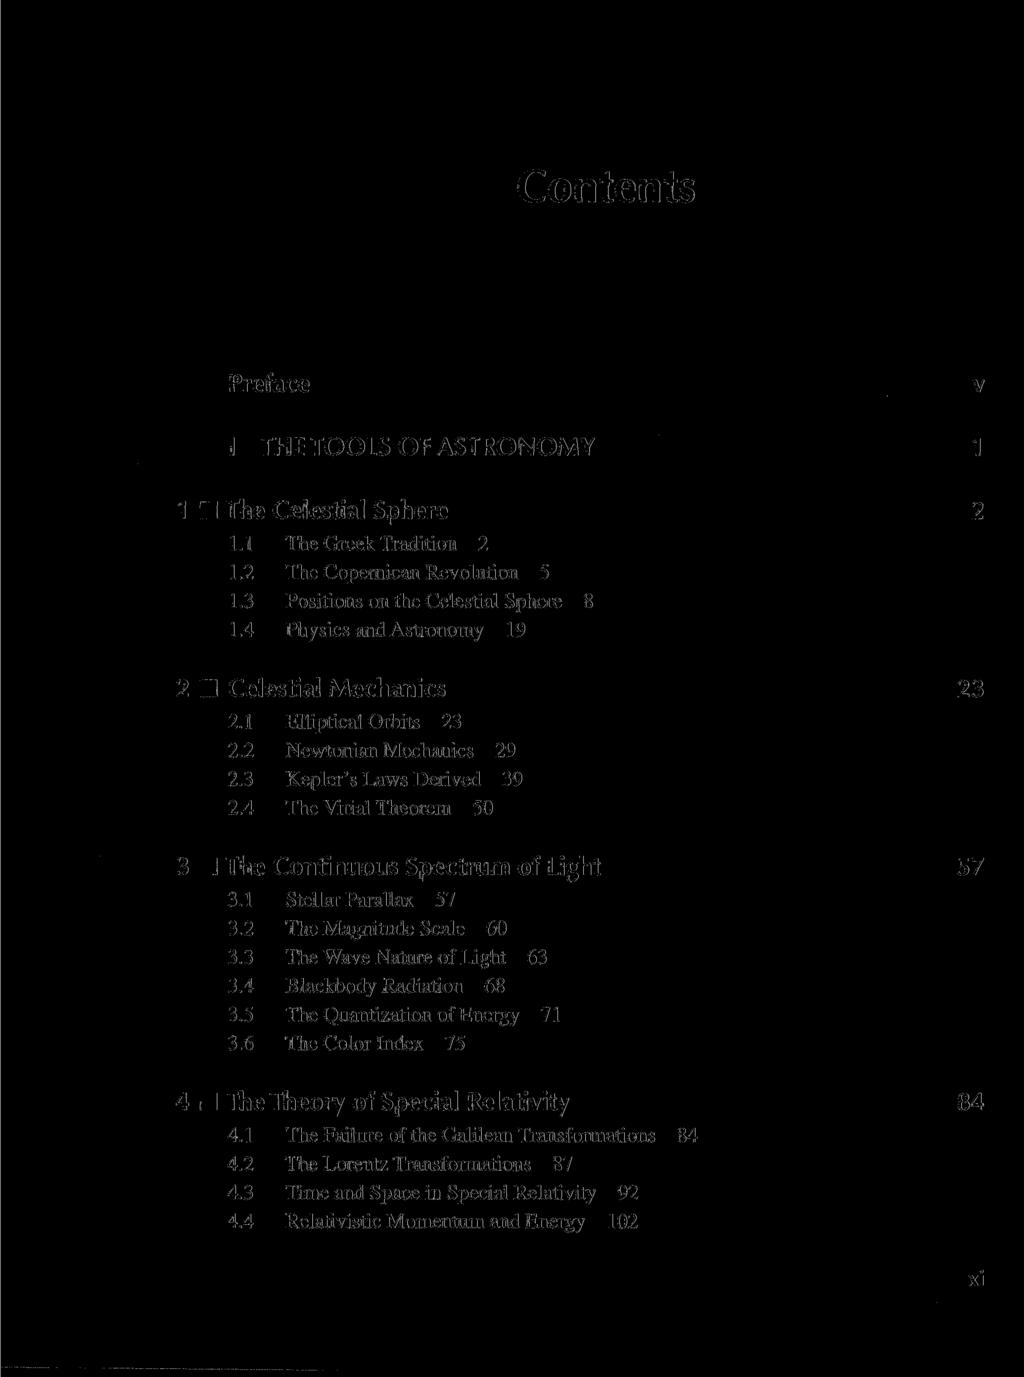 Contents Preface v I THE TOOLS OFASTRONOMY 1 1 The Celestial Sphere 2 1.1 The Greek Tradition 2 1.2 The Copernican Revolution 5 1.3 Positions on the Celestial Sphere 8 1.